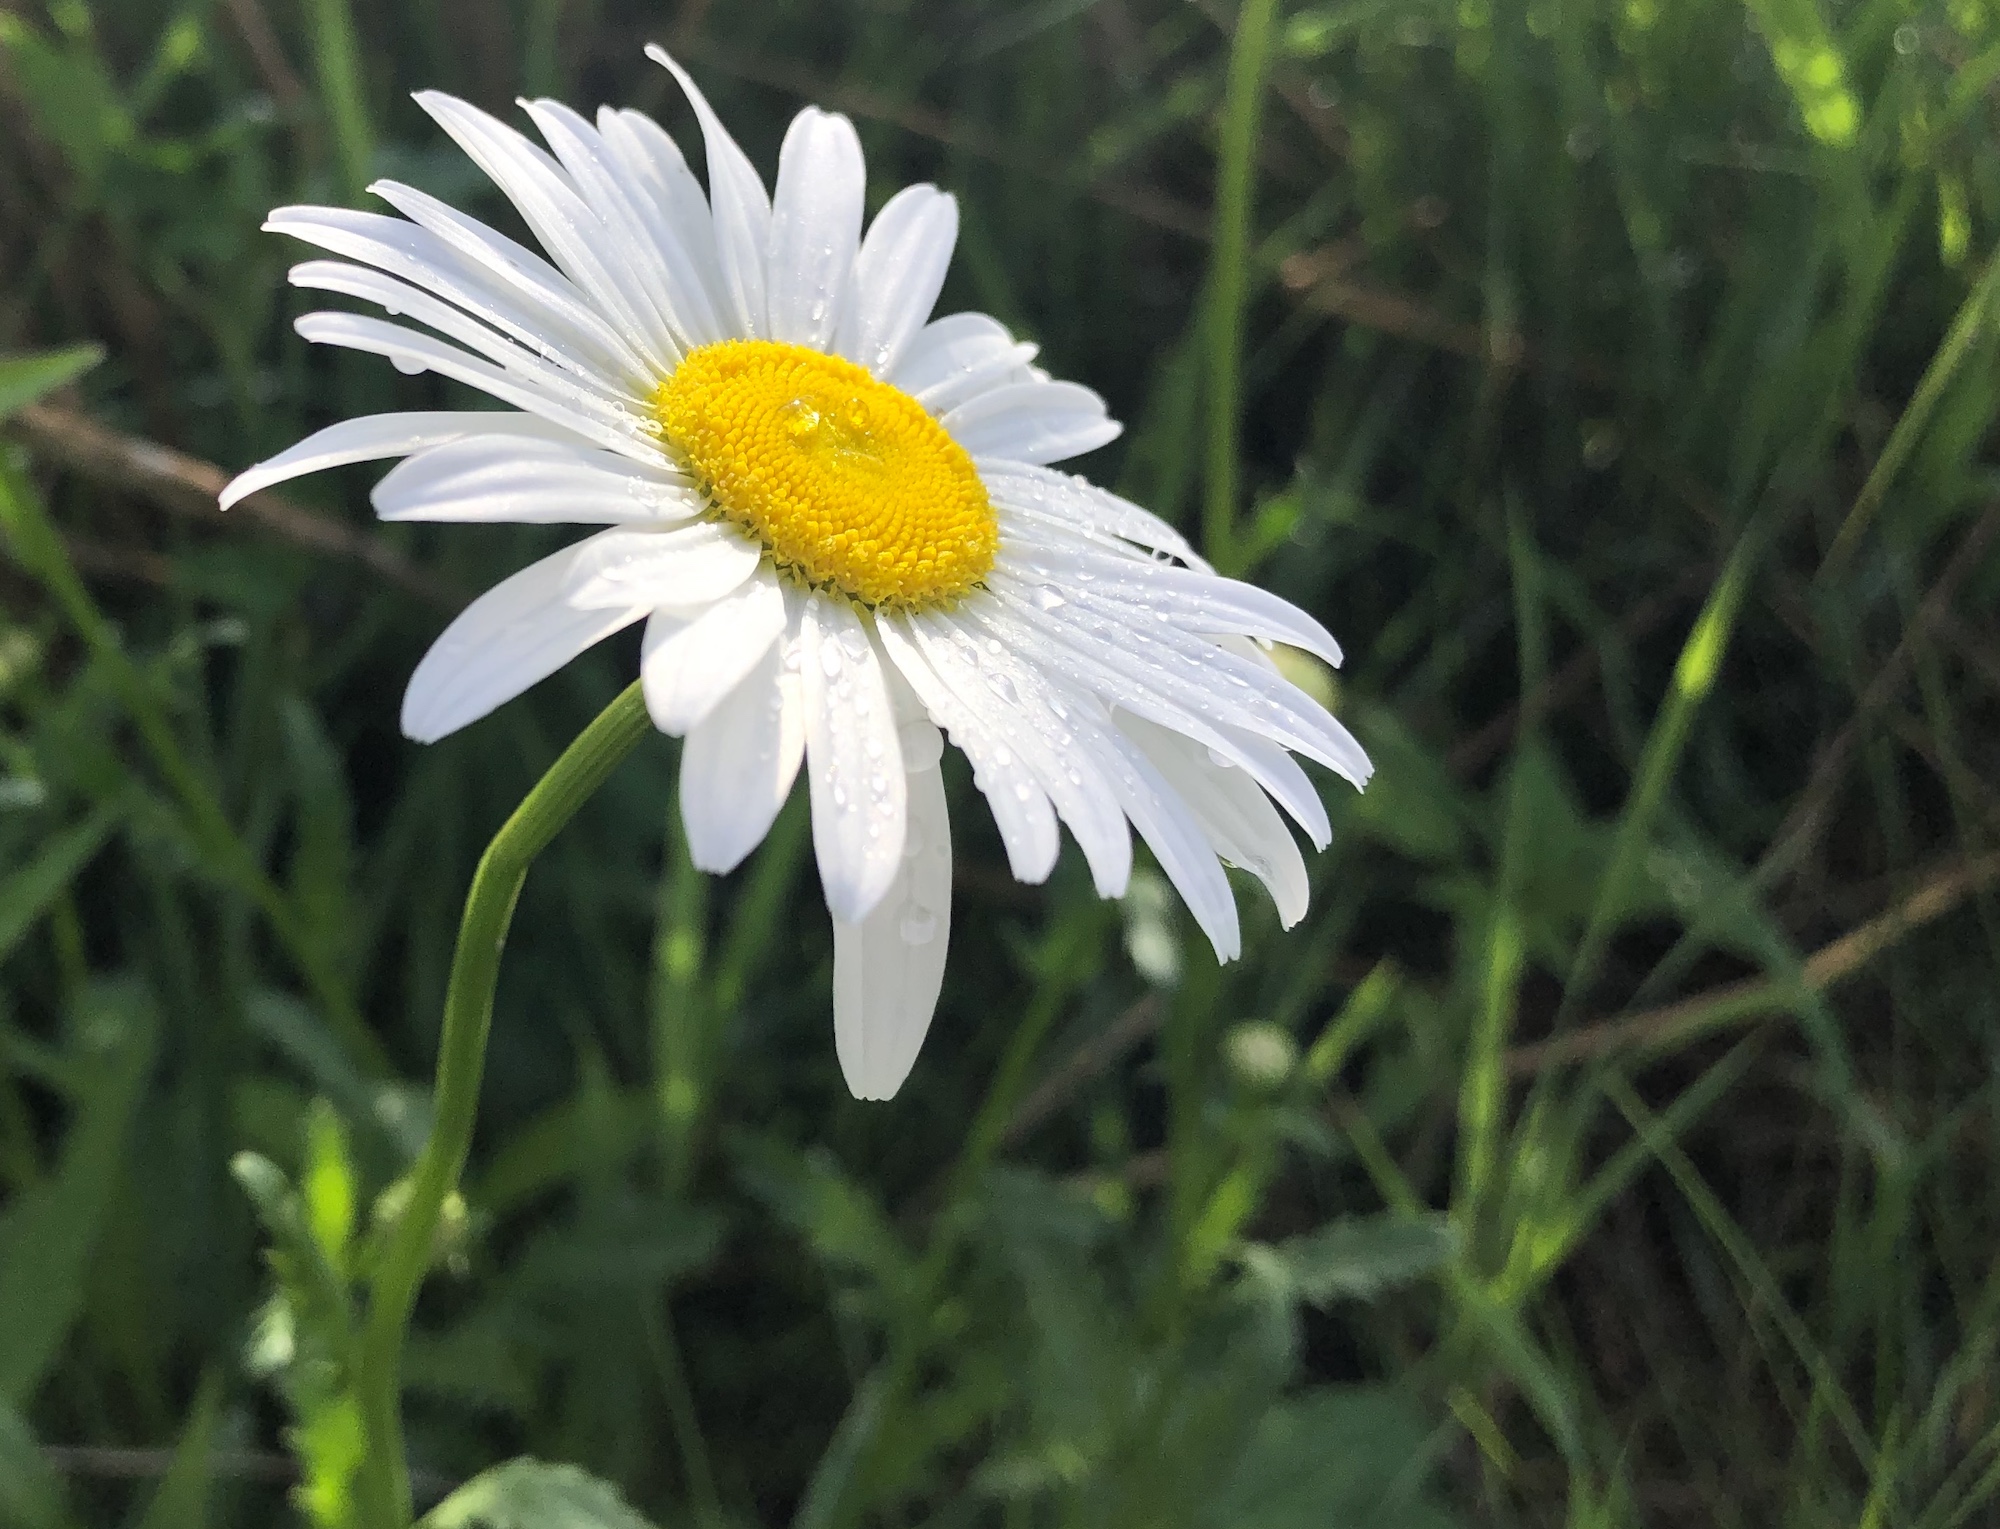 Ox-eye Daisy on bank of retaining pond in Madison, Wisconsin on June 03, 2020.